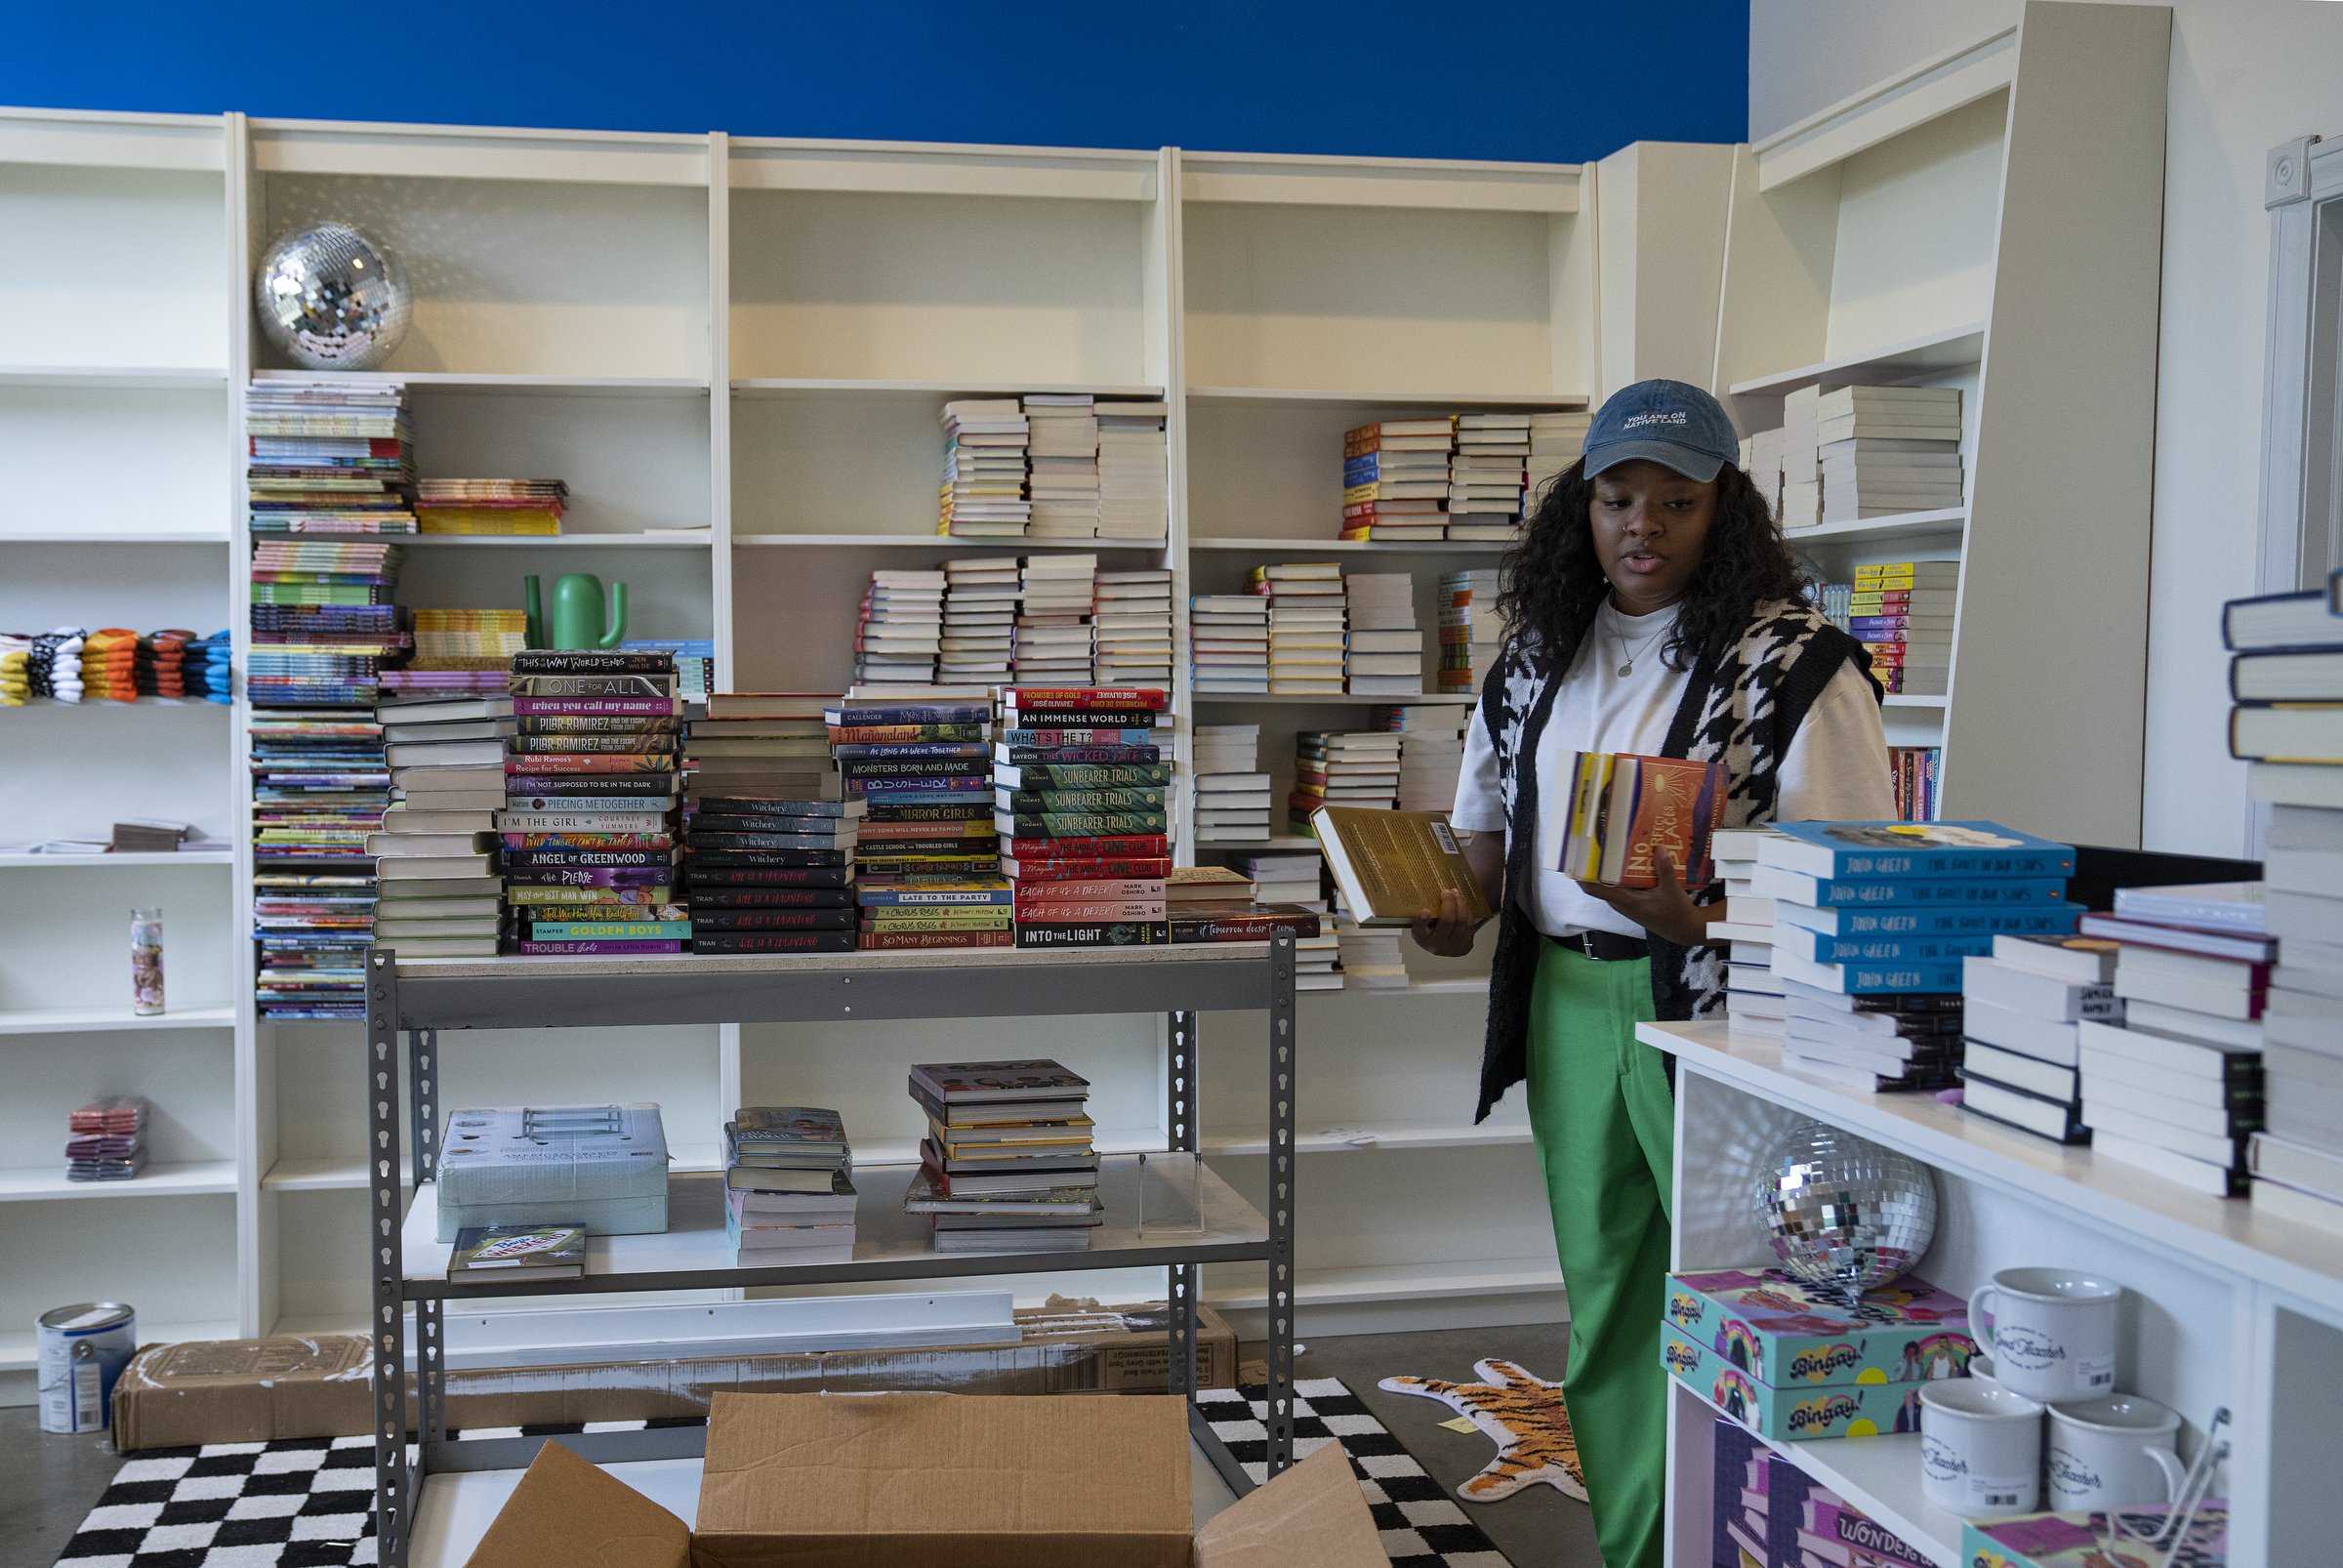  Leah Johnson unpacks books at her bookstore, Loudmouth Books, on Tuesday, Aug. 29, 2023, in Indianapolis. Johnson, an author and owner of the shop, will sell books that have been banned by government and school systems, and books written by and for 